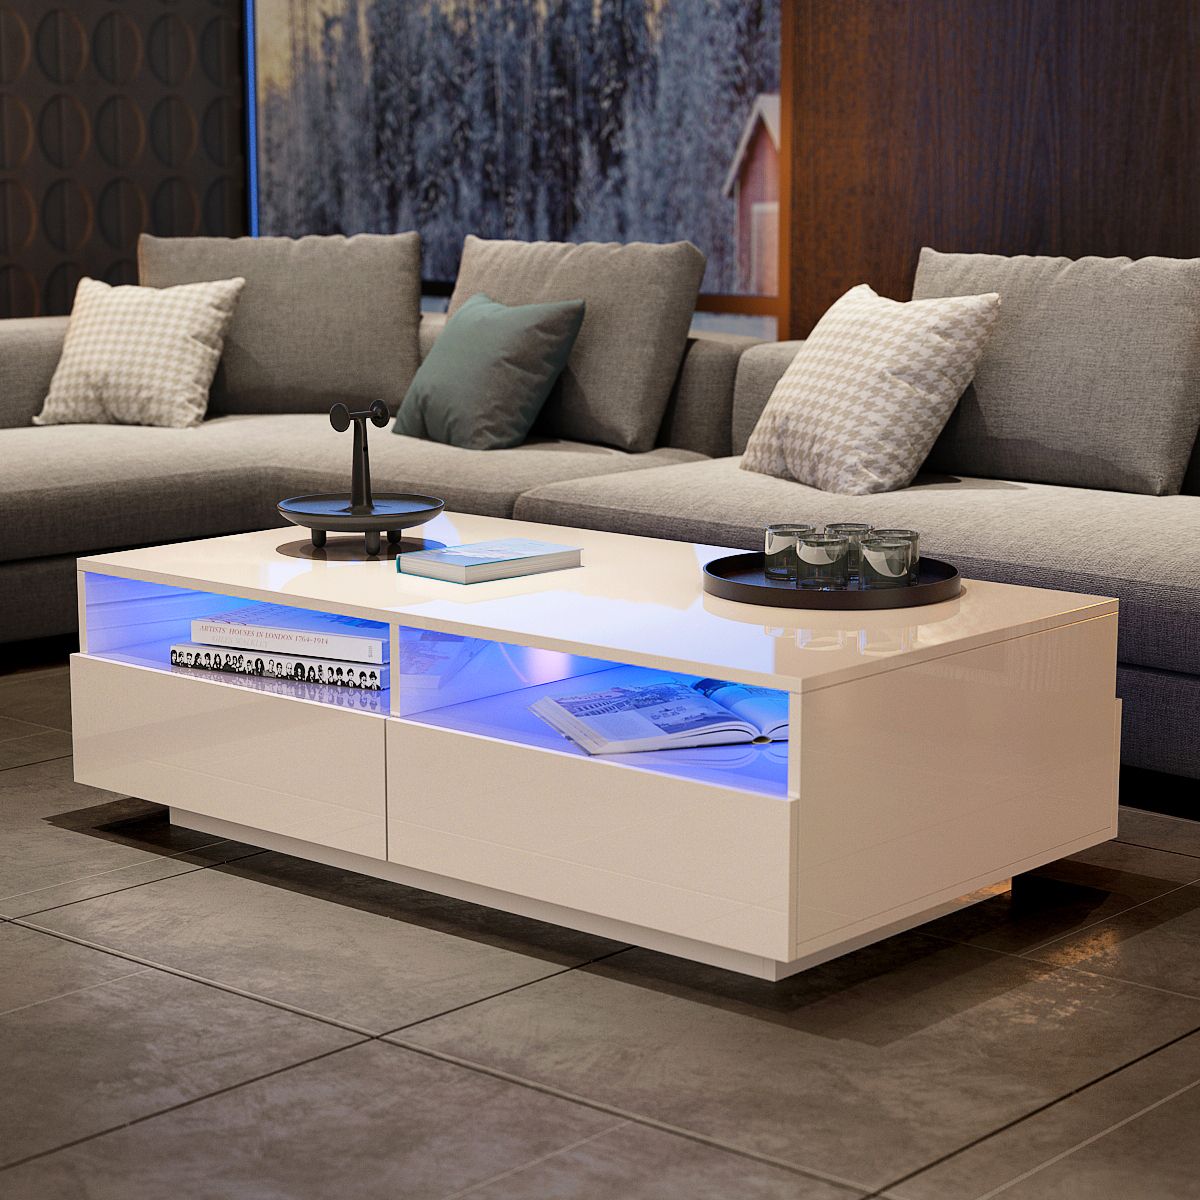 White High Gloss Coffee Table With Led Lights : High Gloss White Coffee Pertaining To Led Coffee Tables With 4 Drawers (View 9 of 20)